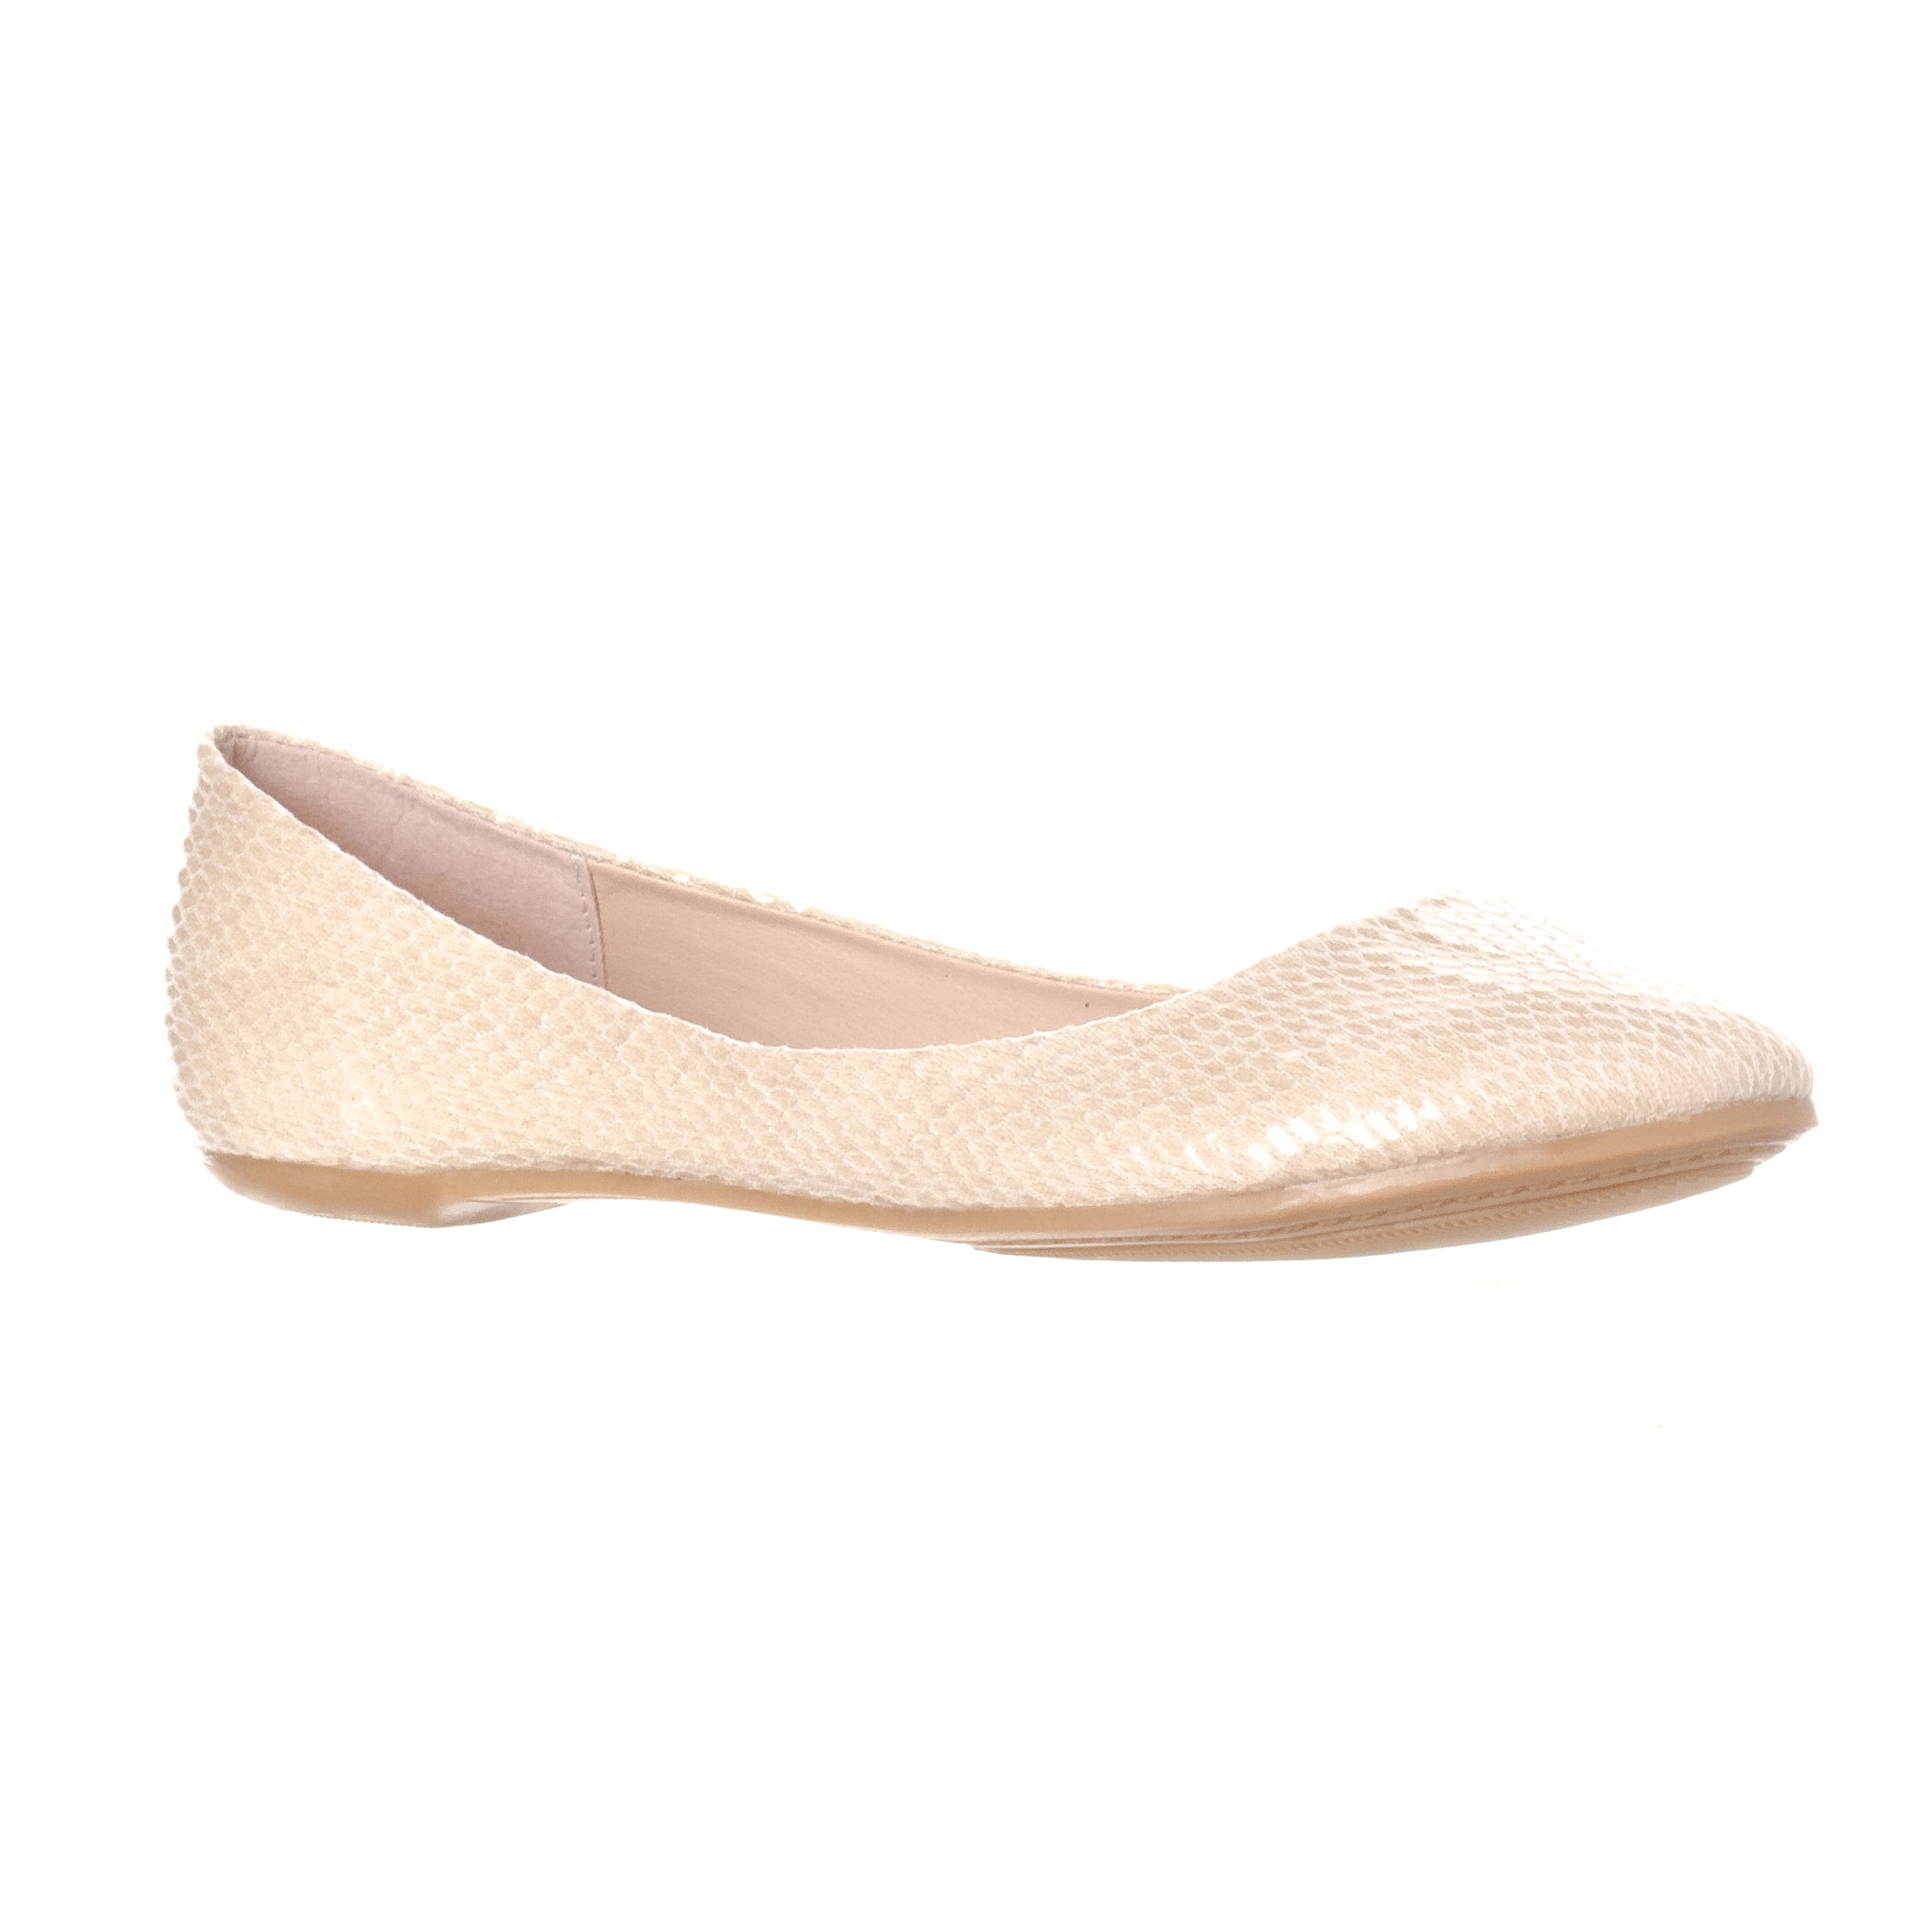 Riverberry - Riverberry Women's Aria Basic Closed Round Toe Ballet Flat ...